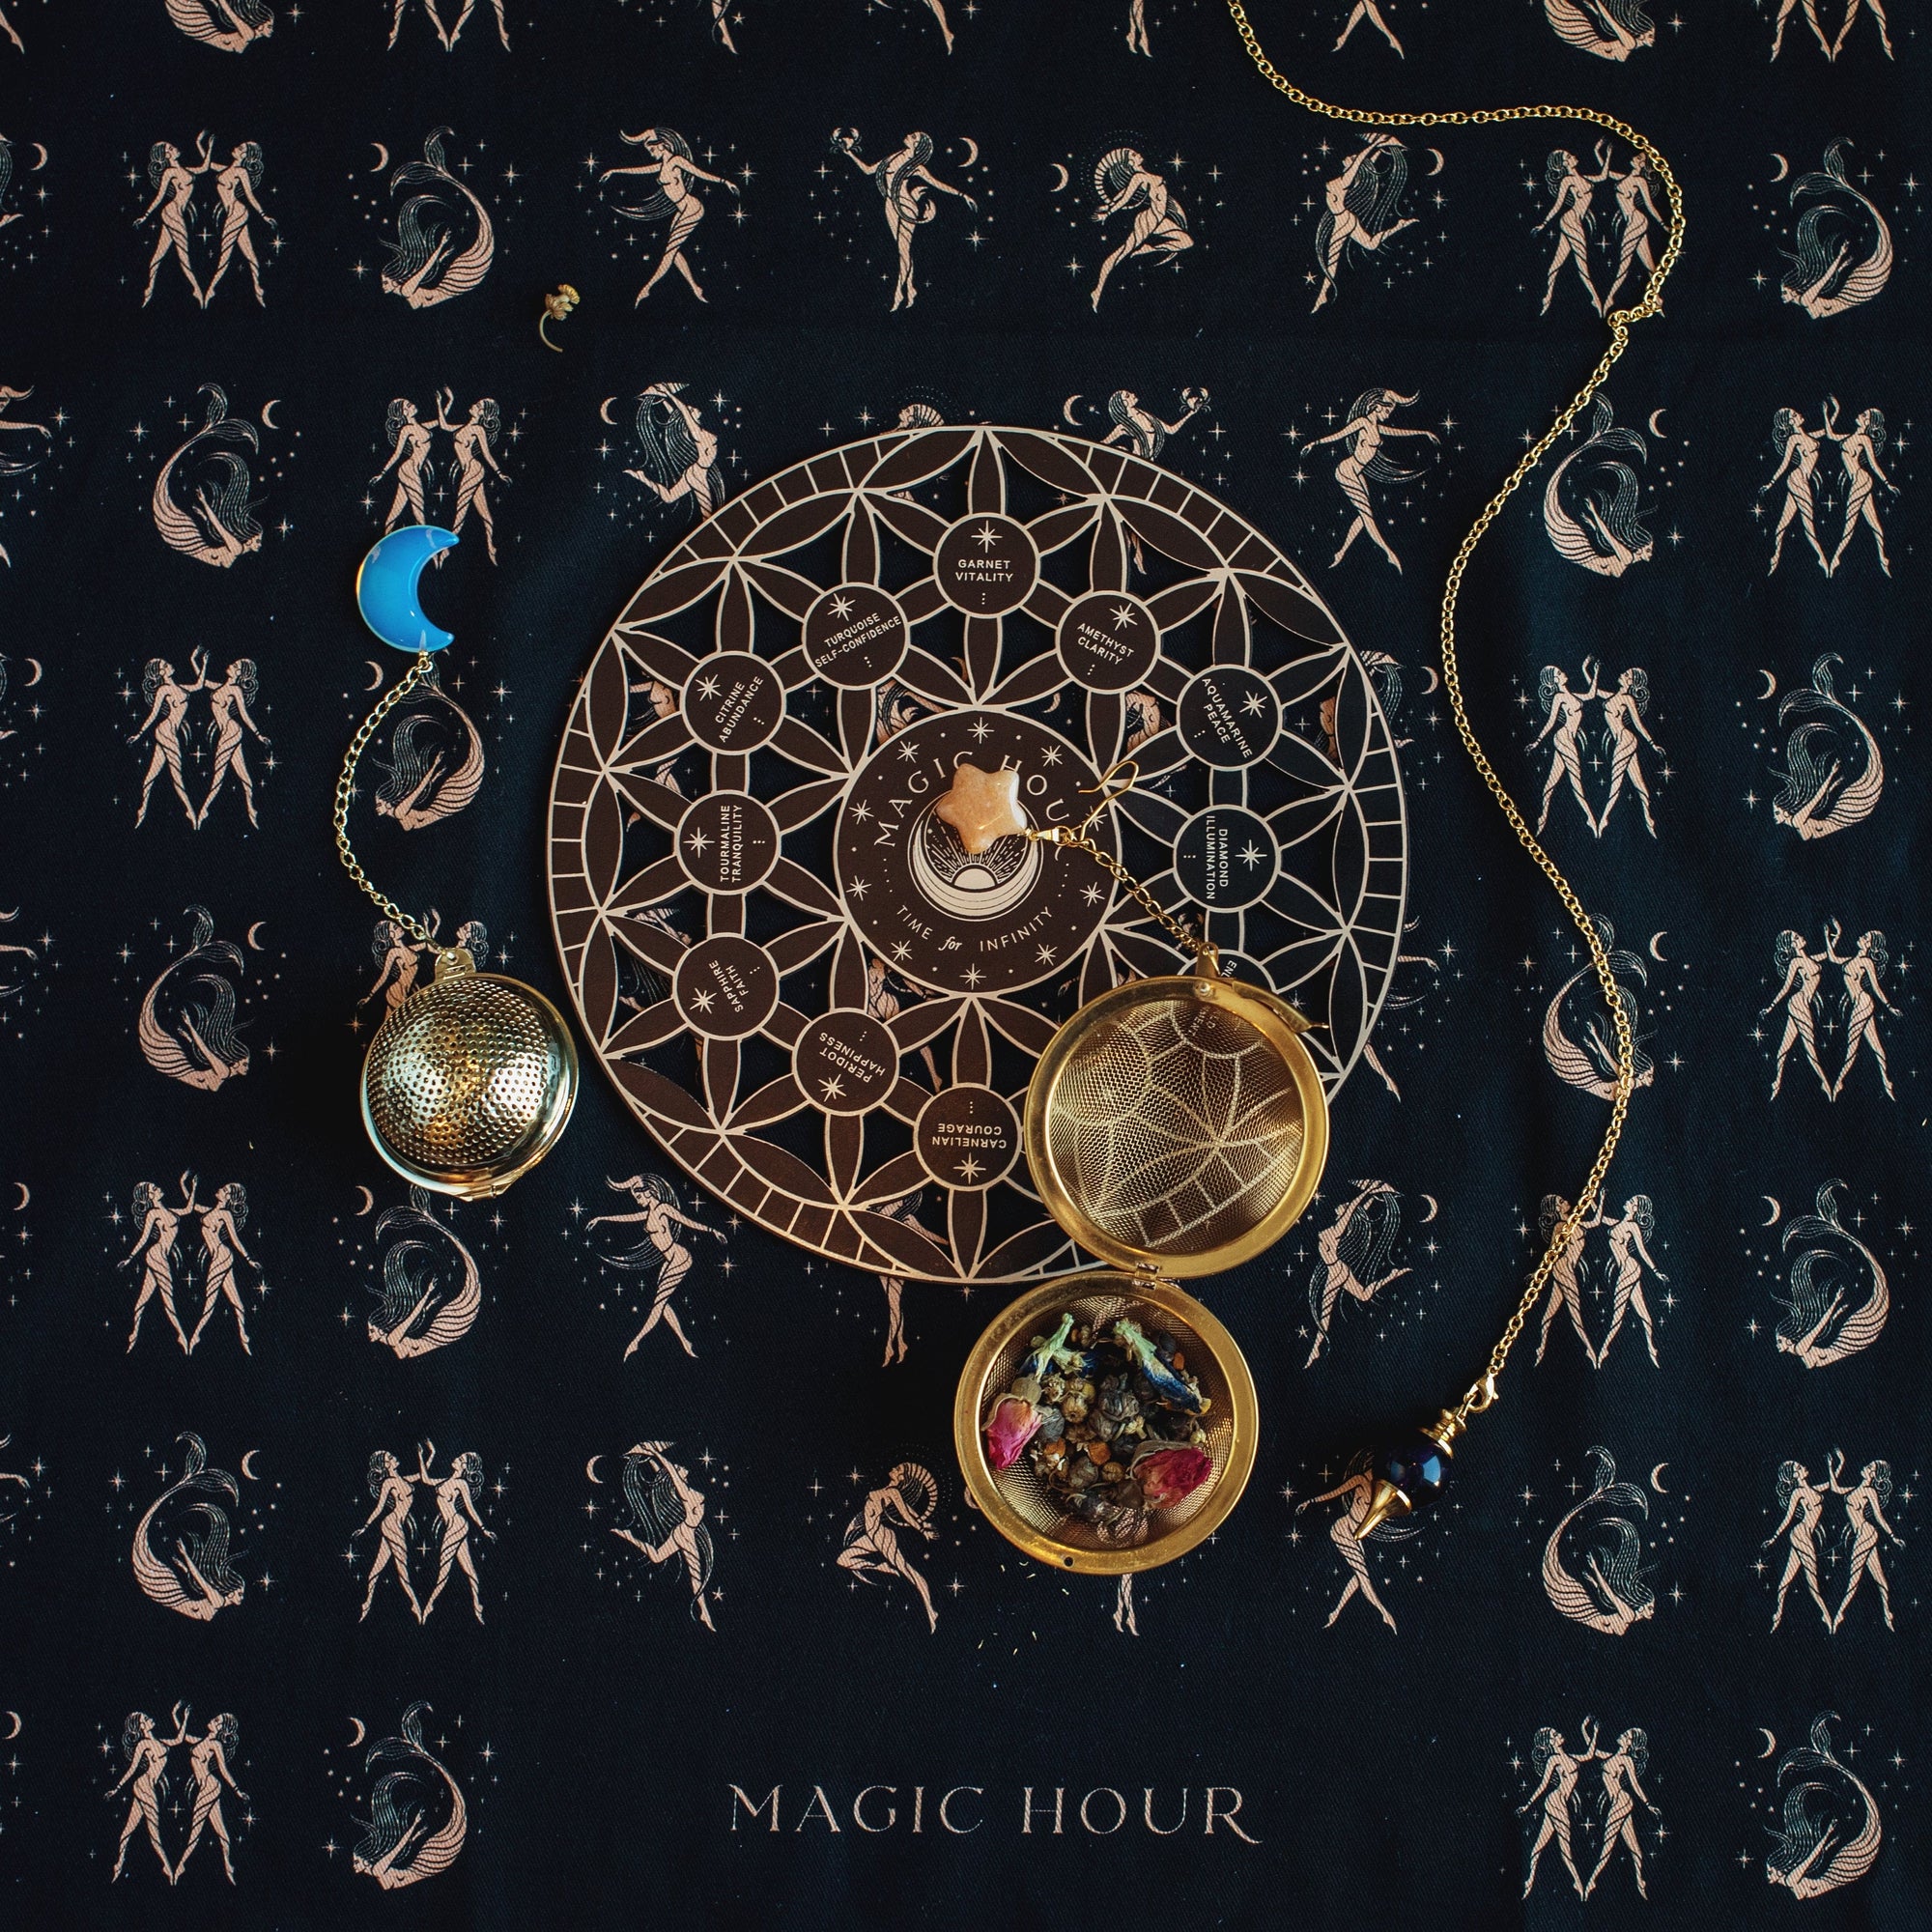 A mystical setup featuring a geometric and lunar phase chart, a gold locket holding various crystals, and a moon-shaped pendant, all set on a celestial-patterned cloth with dancing figures. A steaming cup of loose leaf tea completes the scene. The caption at the bottom reads "Magic Hour Tea Ceremony Towels.